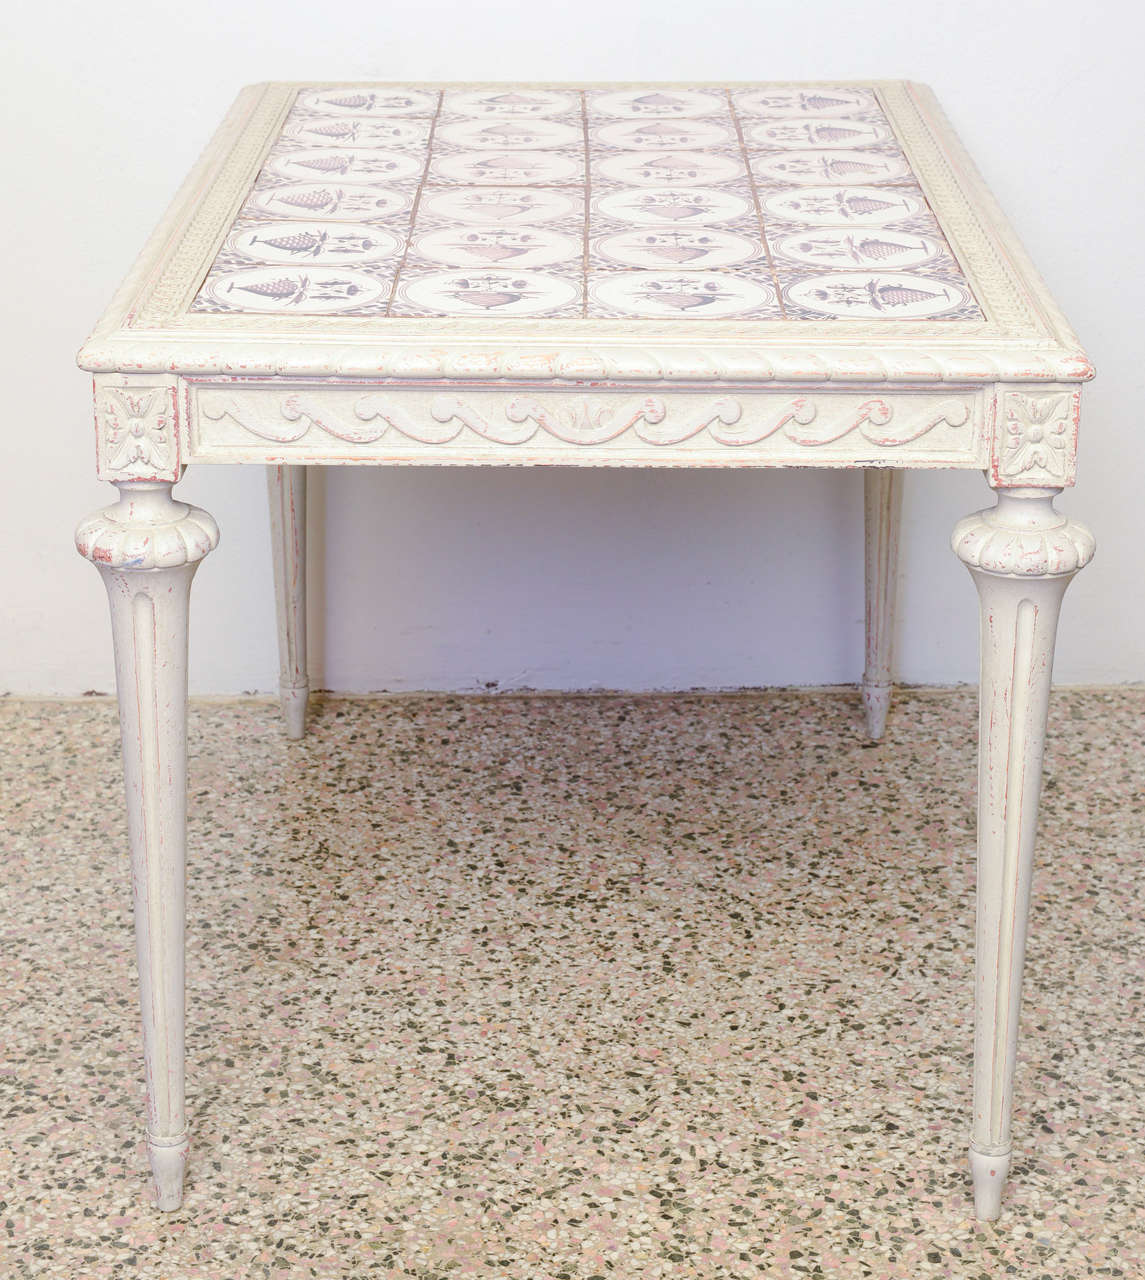 19th Century Swedish Antique Table with Ceramic Tile Top For Sale 4